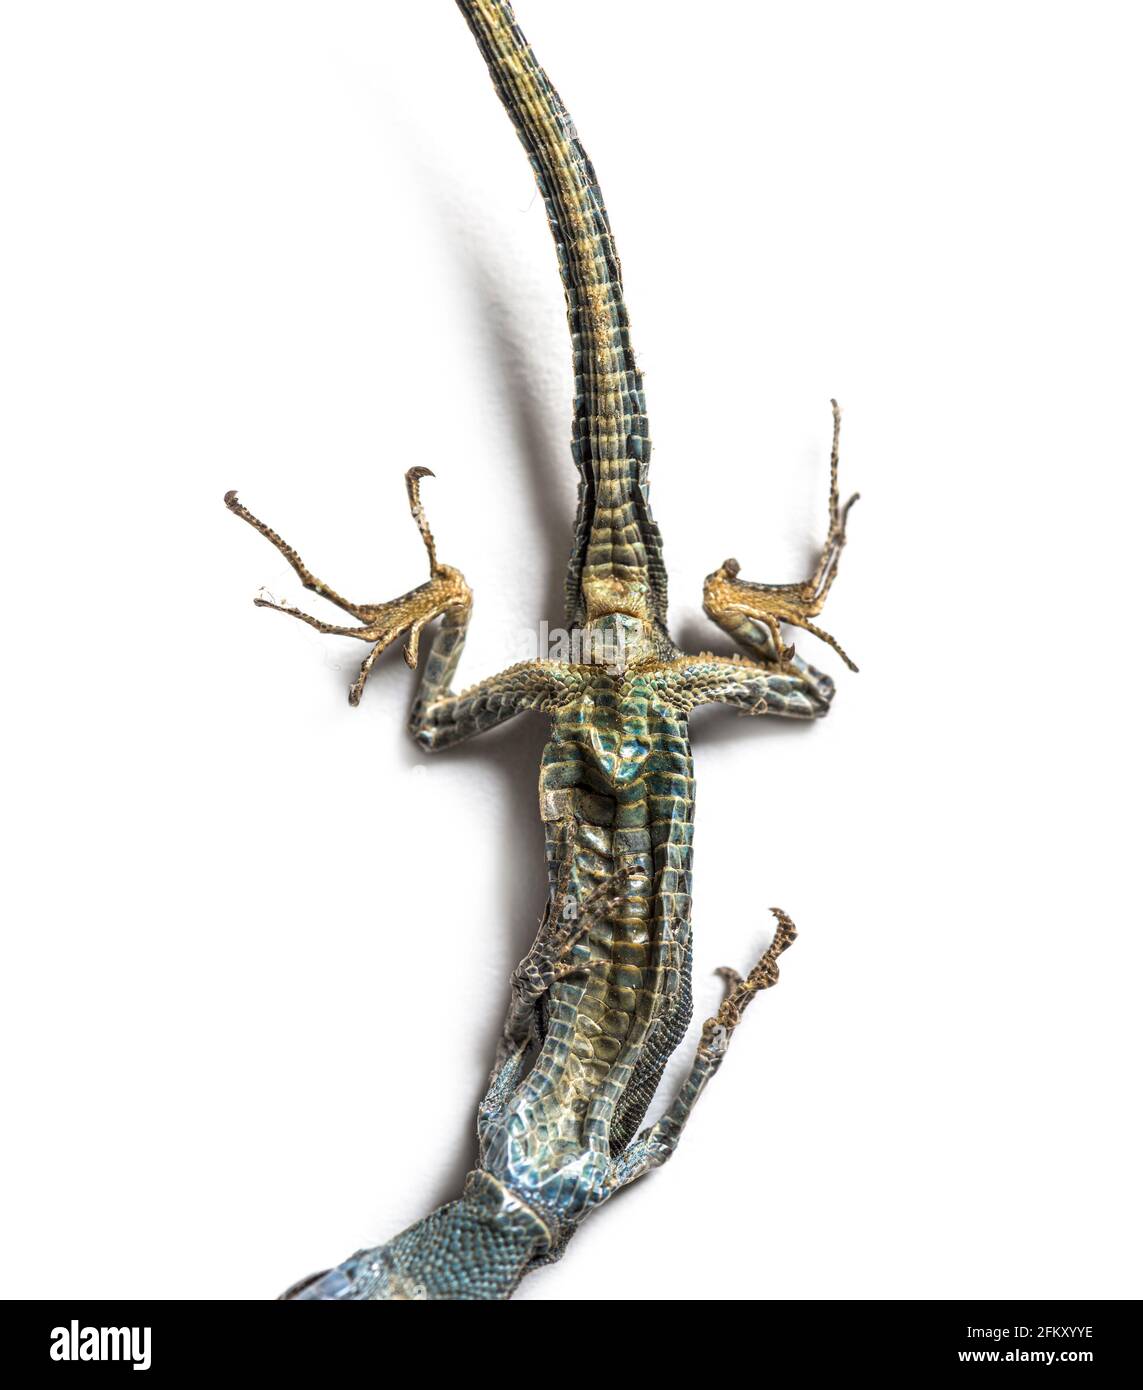 Dead Common wall lizard in state of decomposition Stock Photo